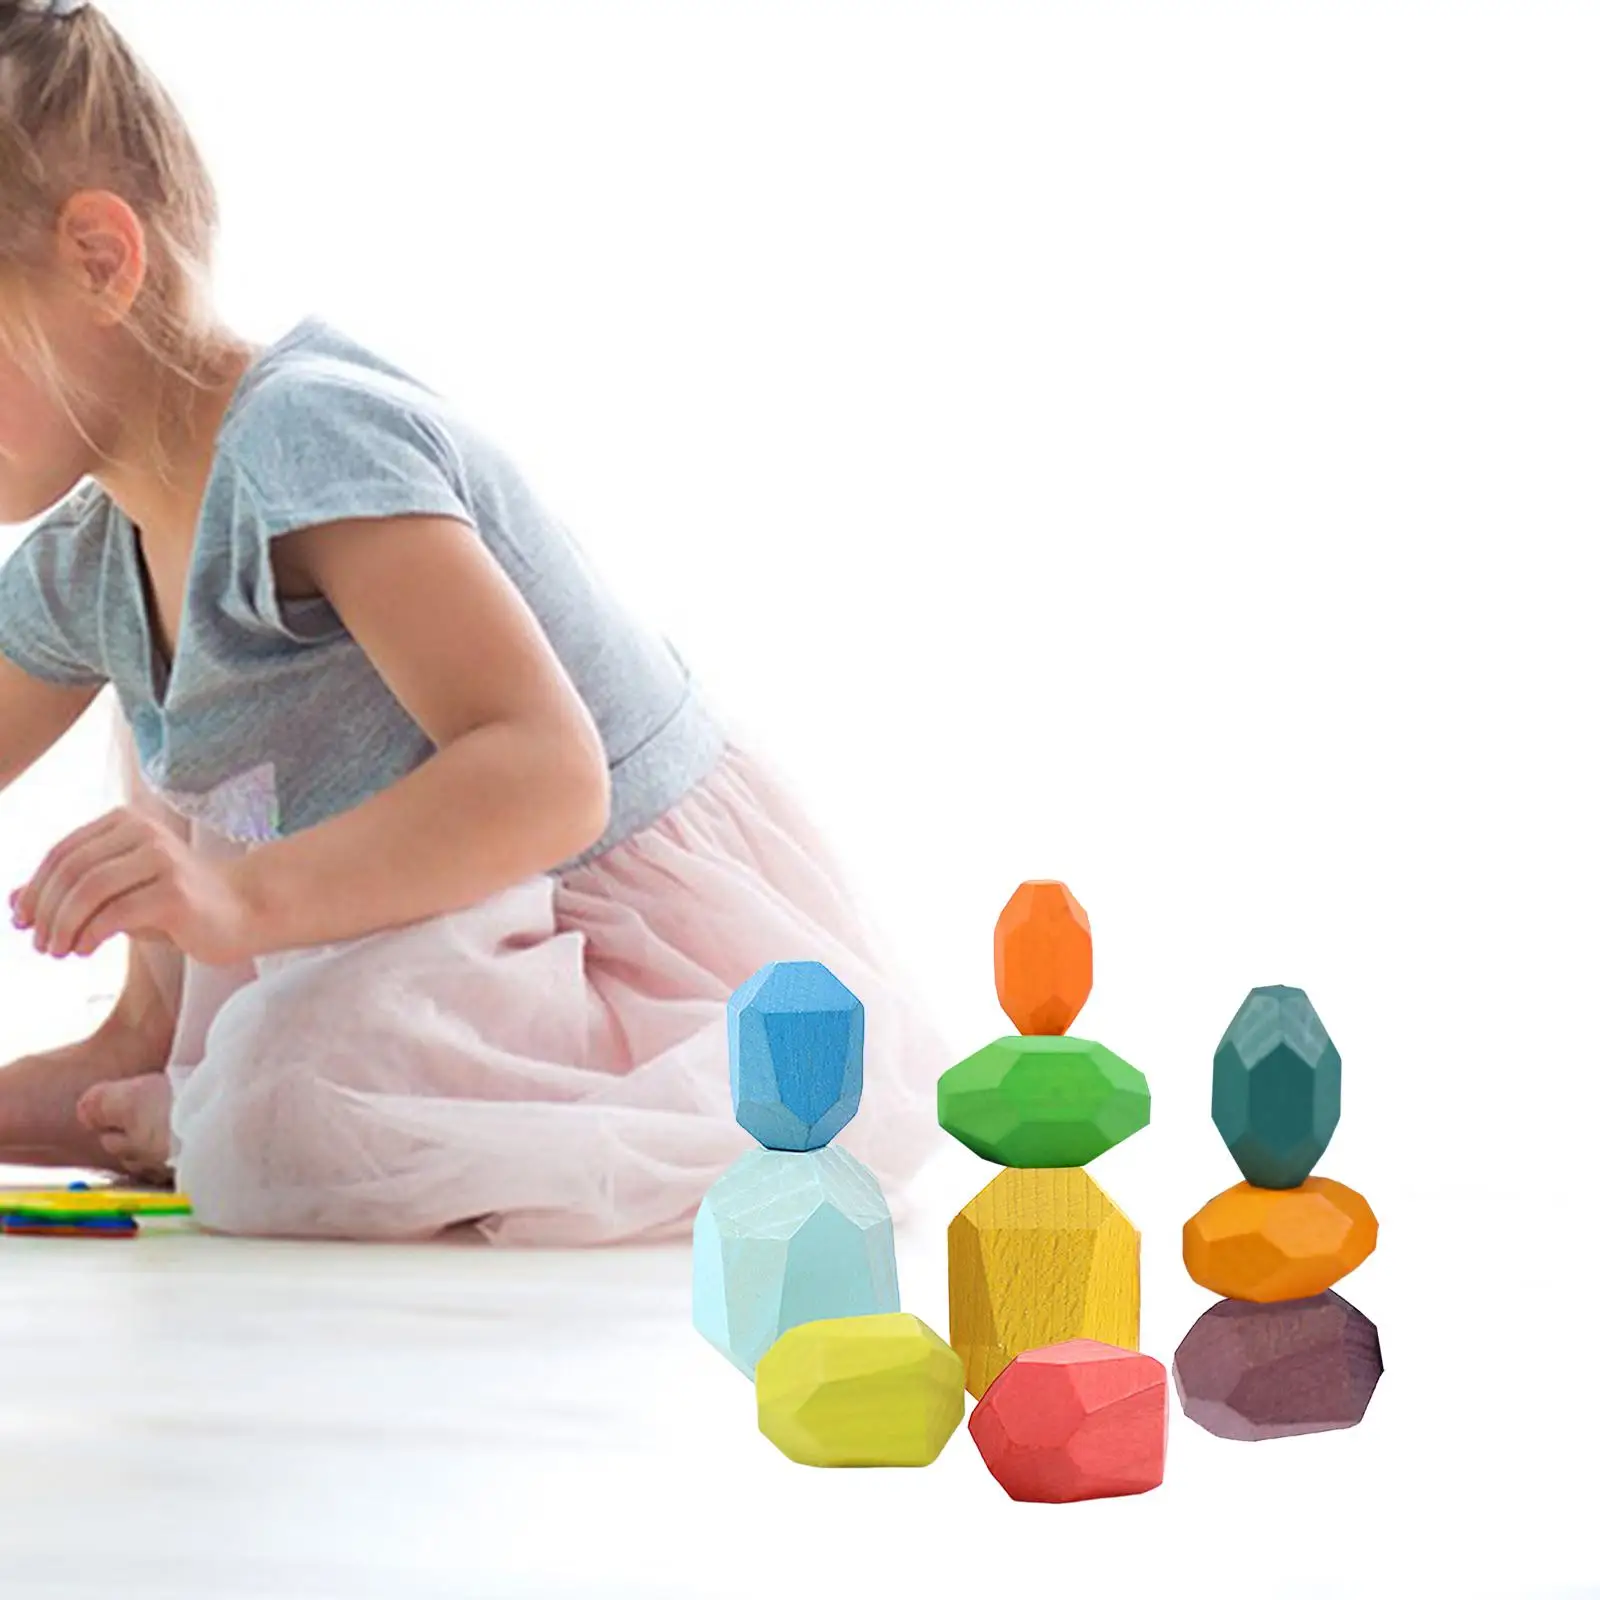 Wooden Balancing Stacking Stones Montessori Preschool Learning Colorful Creative